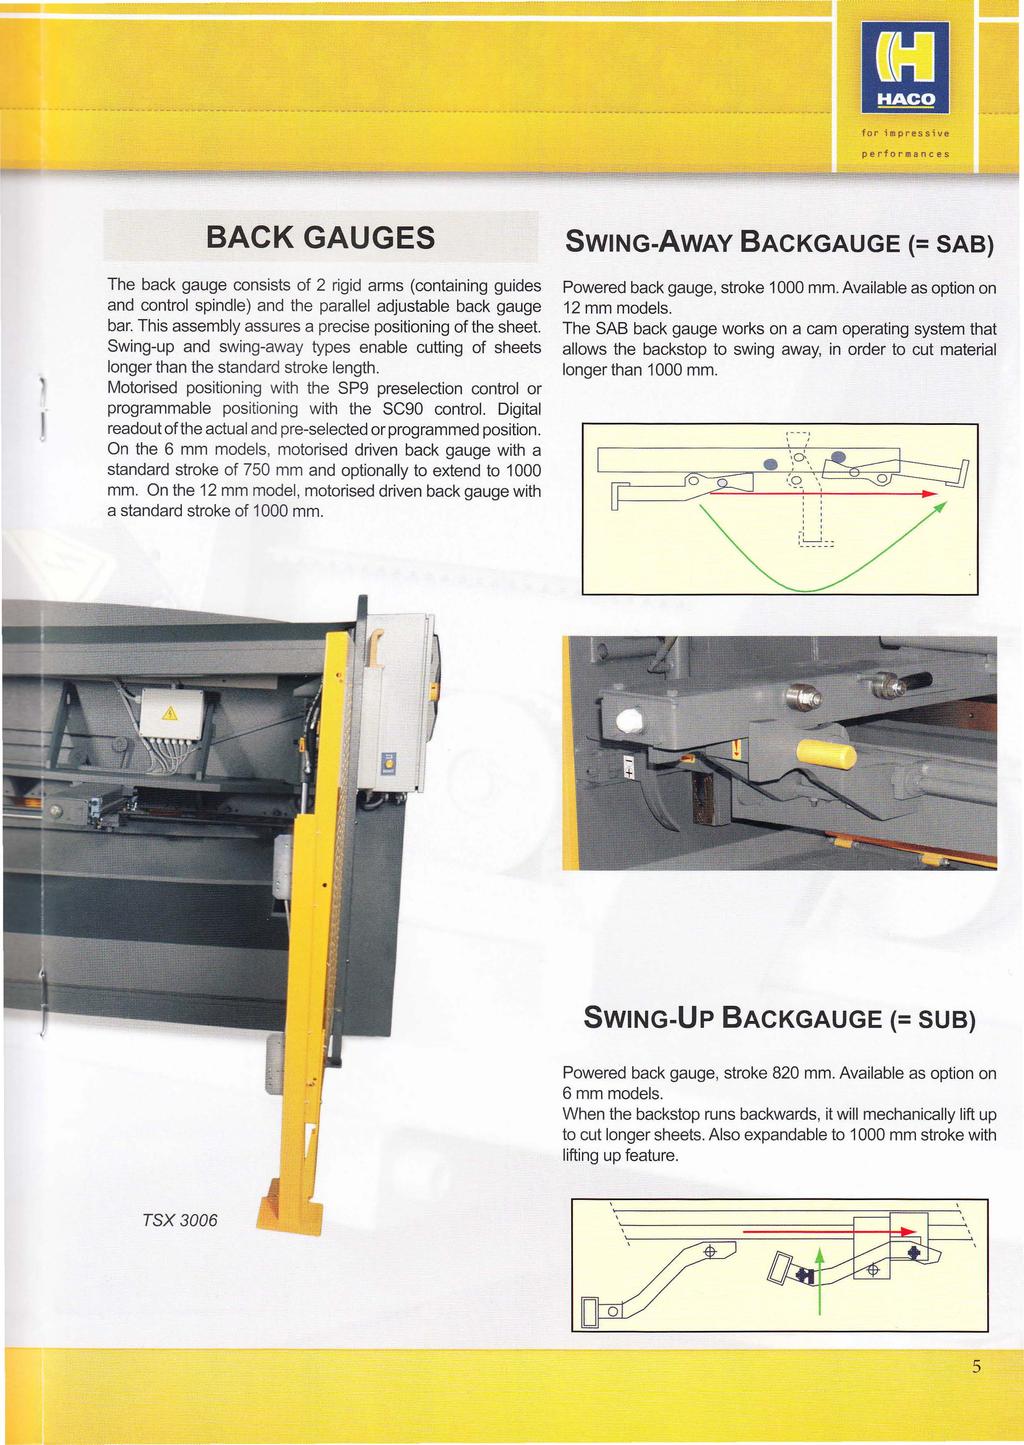 BACK GAUGES The back gauge consists of 2 rigid arms (containing guides and control spindle) and the parallel adjustable back gauge bar. This assembly assures a precise positioning of the sheet.